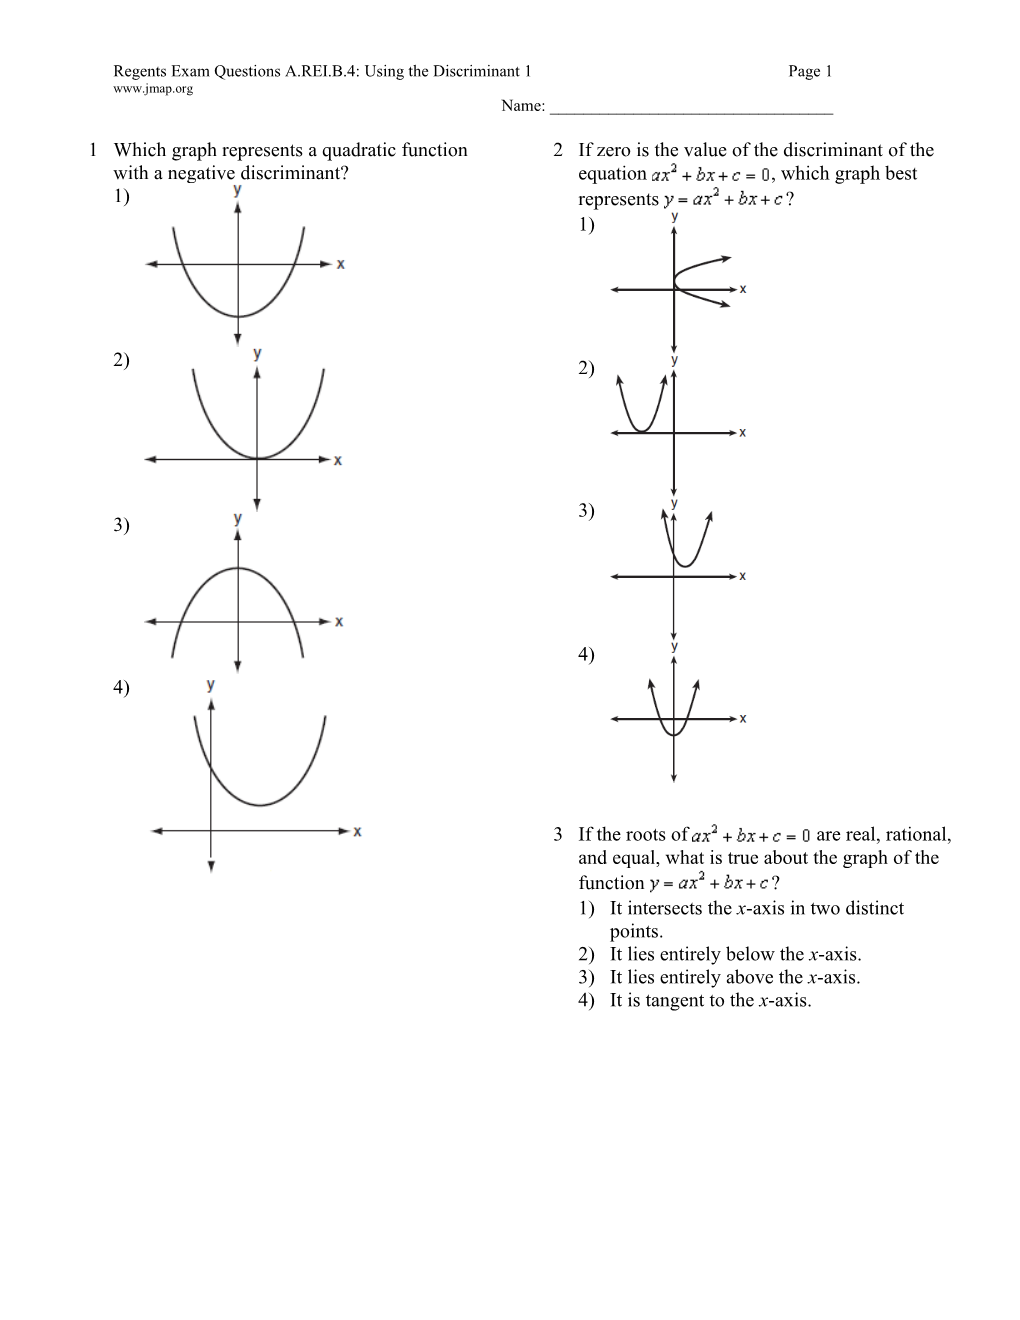 Regents Exam Questions A.REI.B.4: Using the Discriminant 1 Page 2